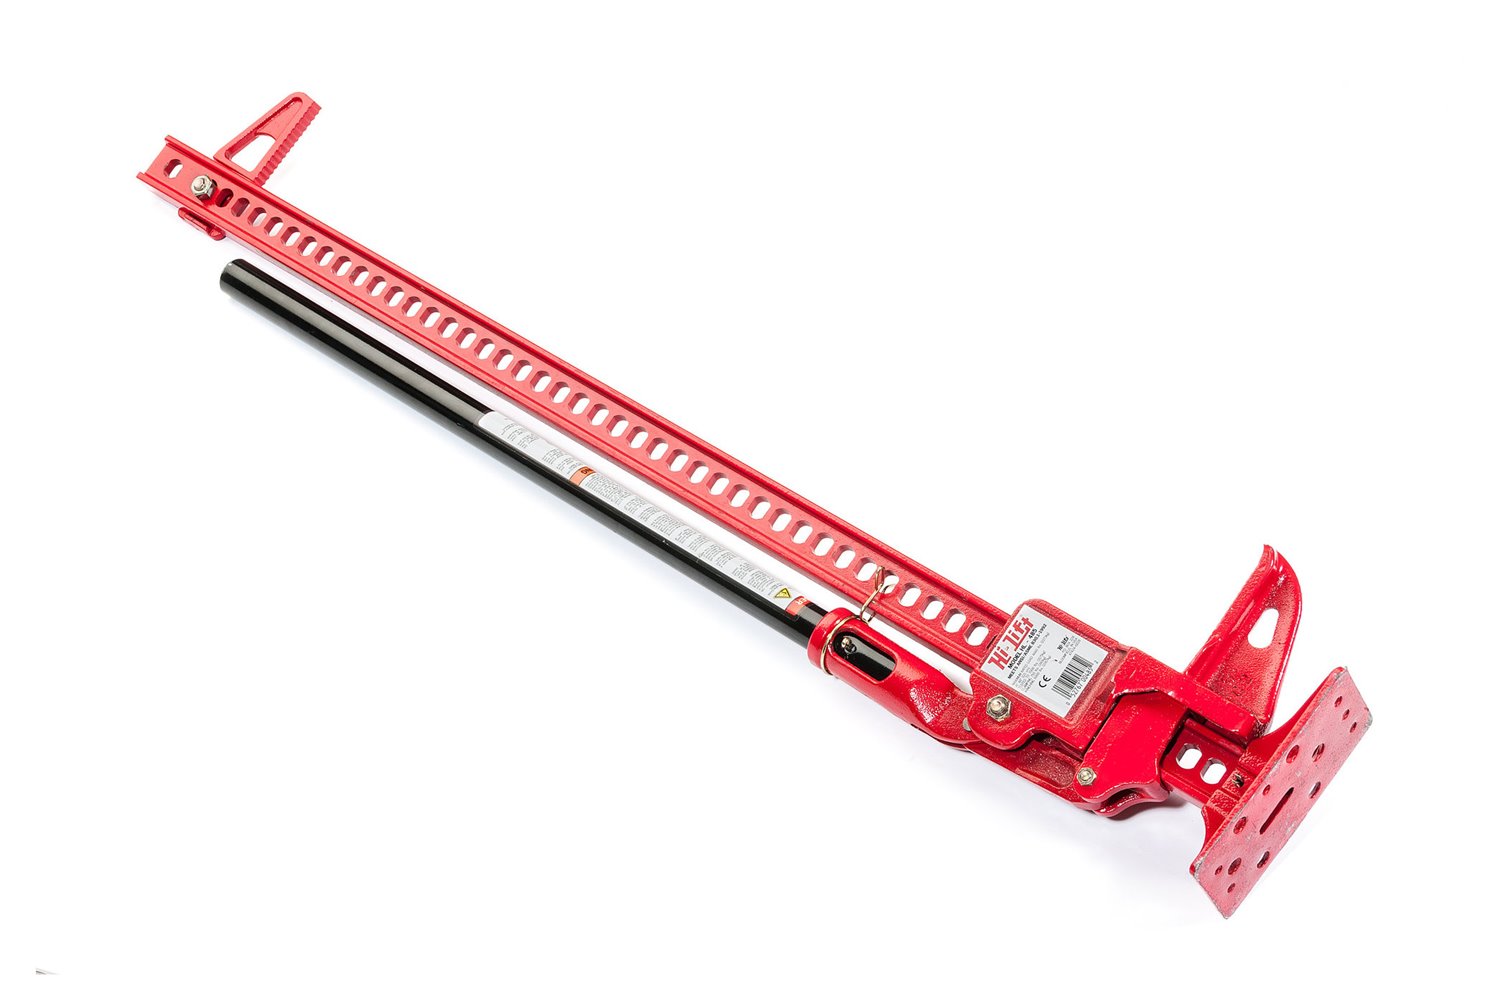 BISupply Farm Jack 6614lbs Red 48in Cast Iron High Lift Jack Utility Off Road Jack with a 3.3 Ton Weight Capacity 